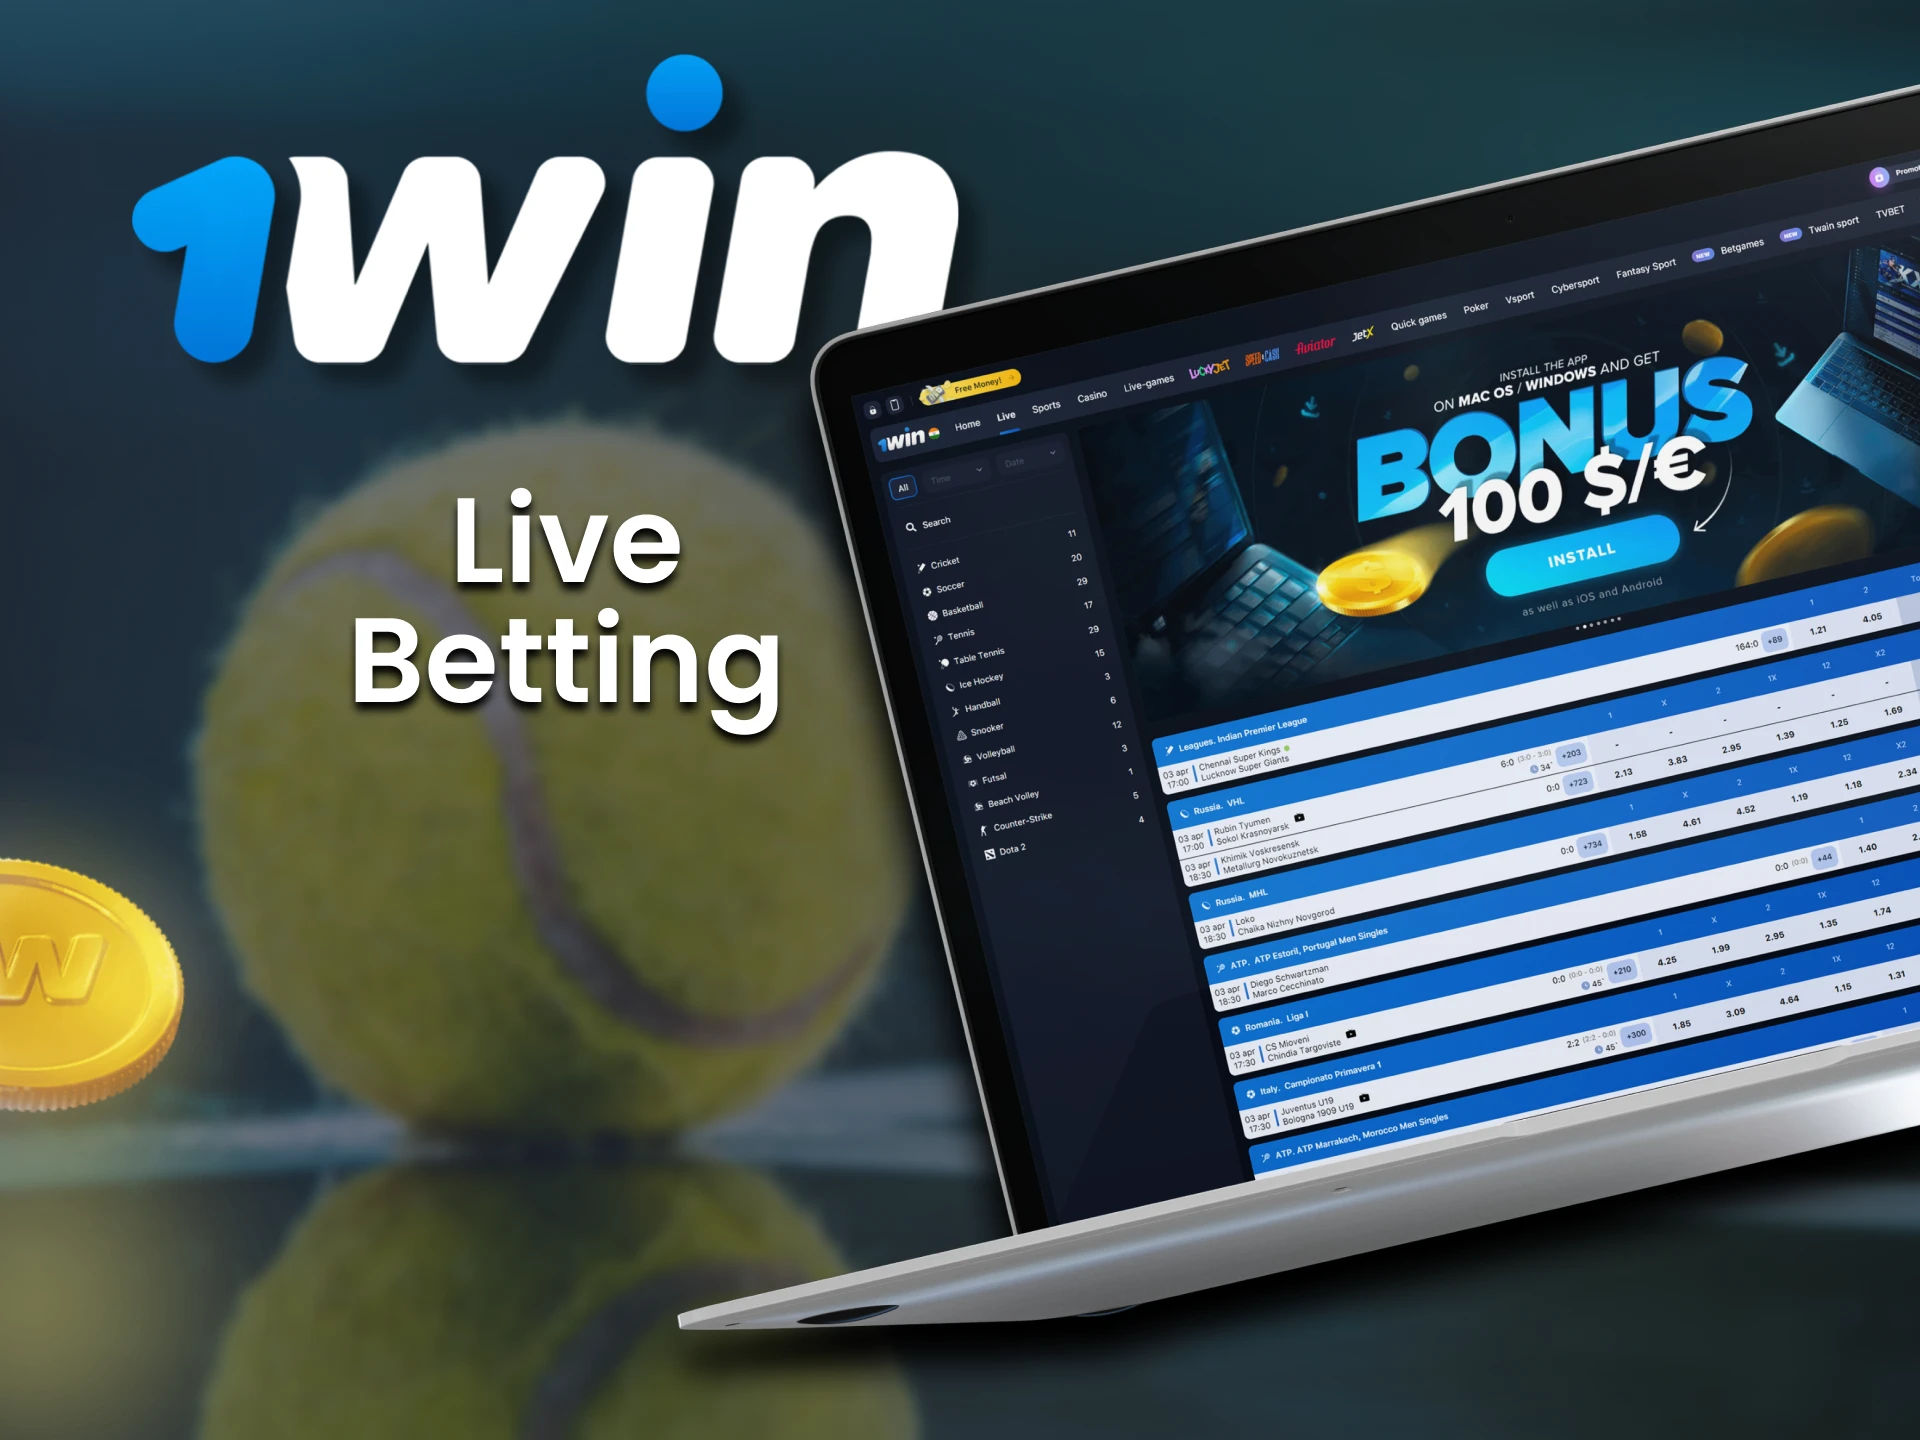 At 1win, bet on matches in the live streaming.